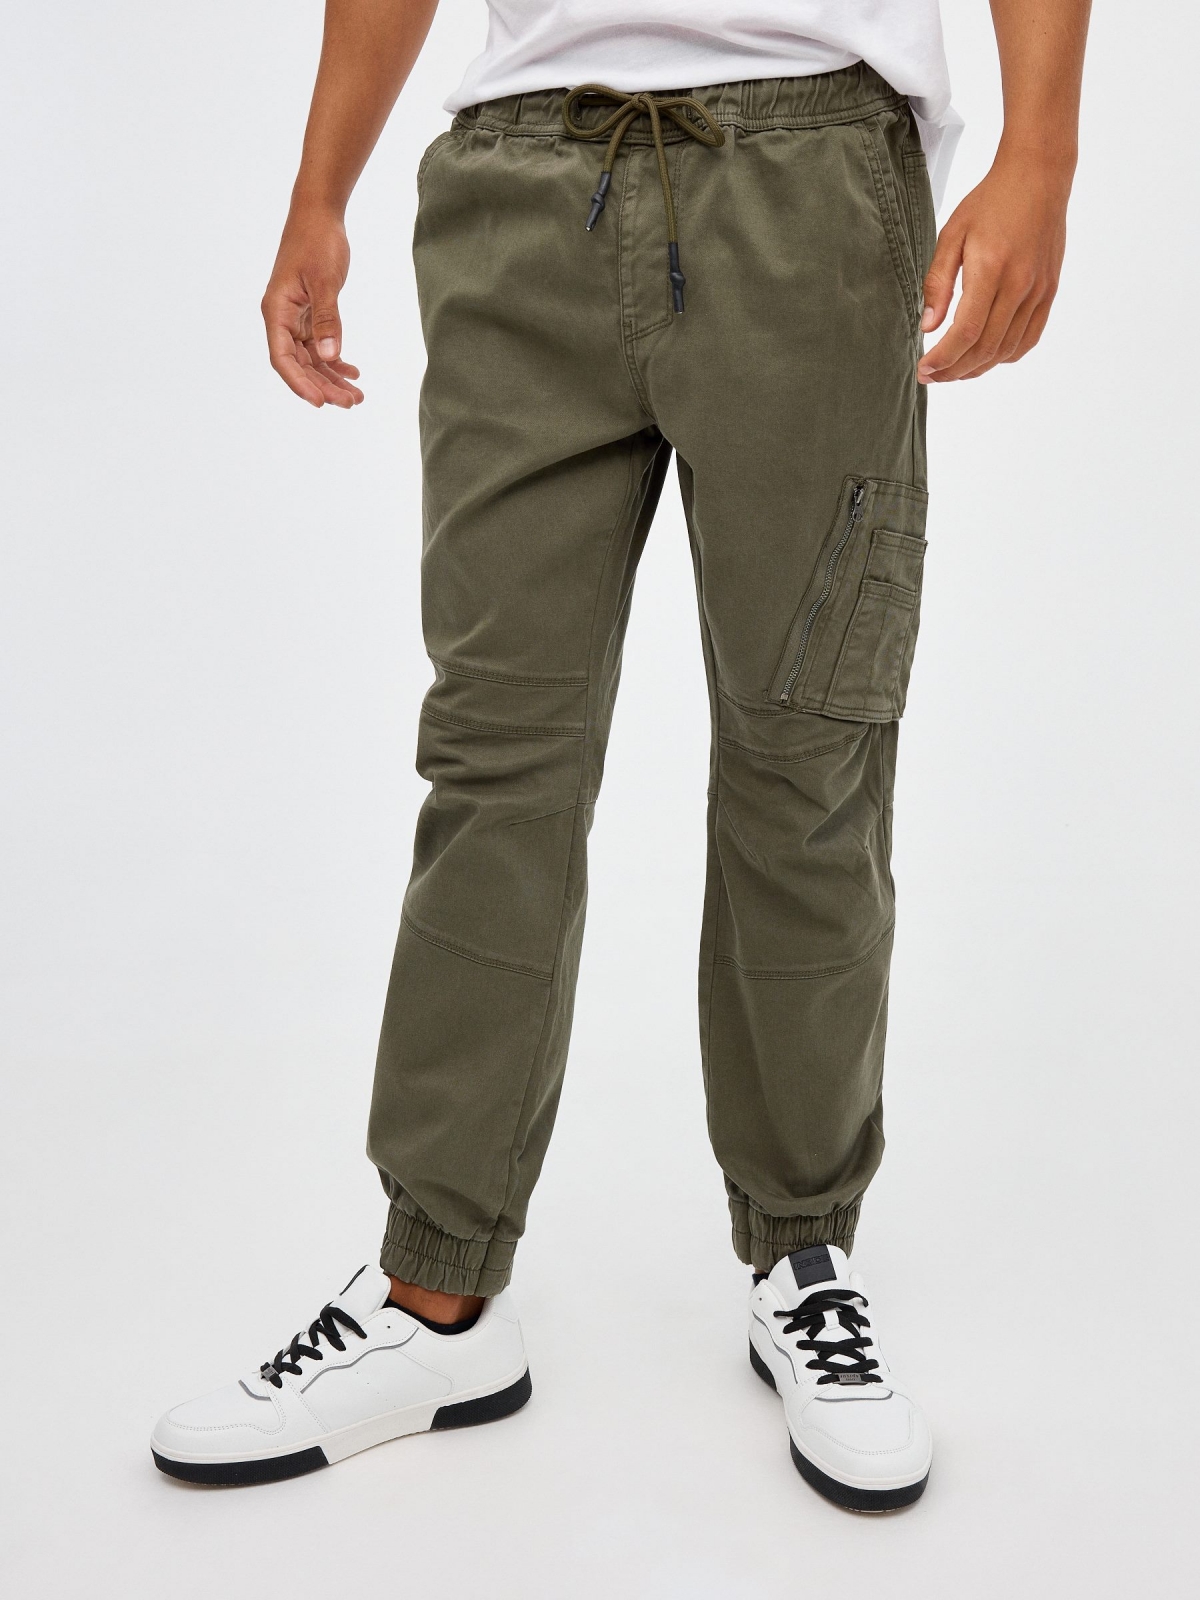 Closed pocket jogger pants green middle front view